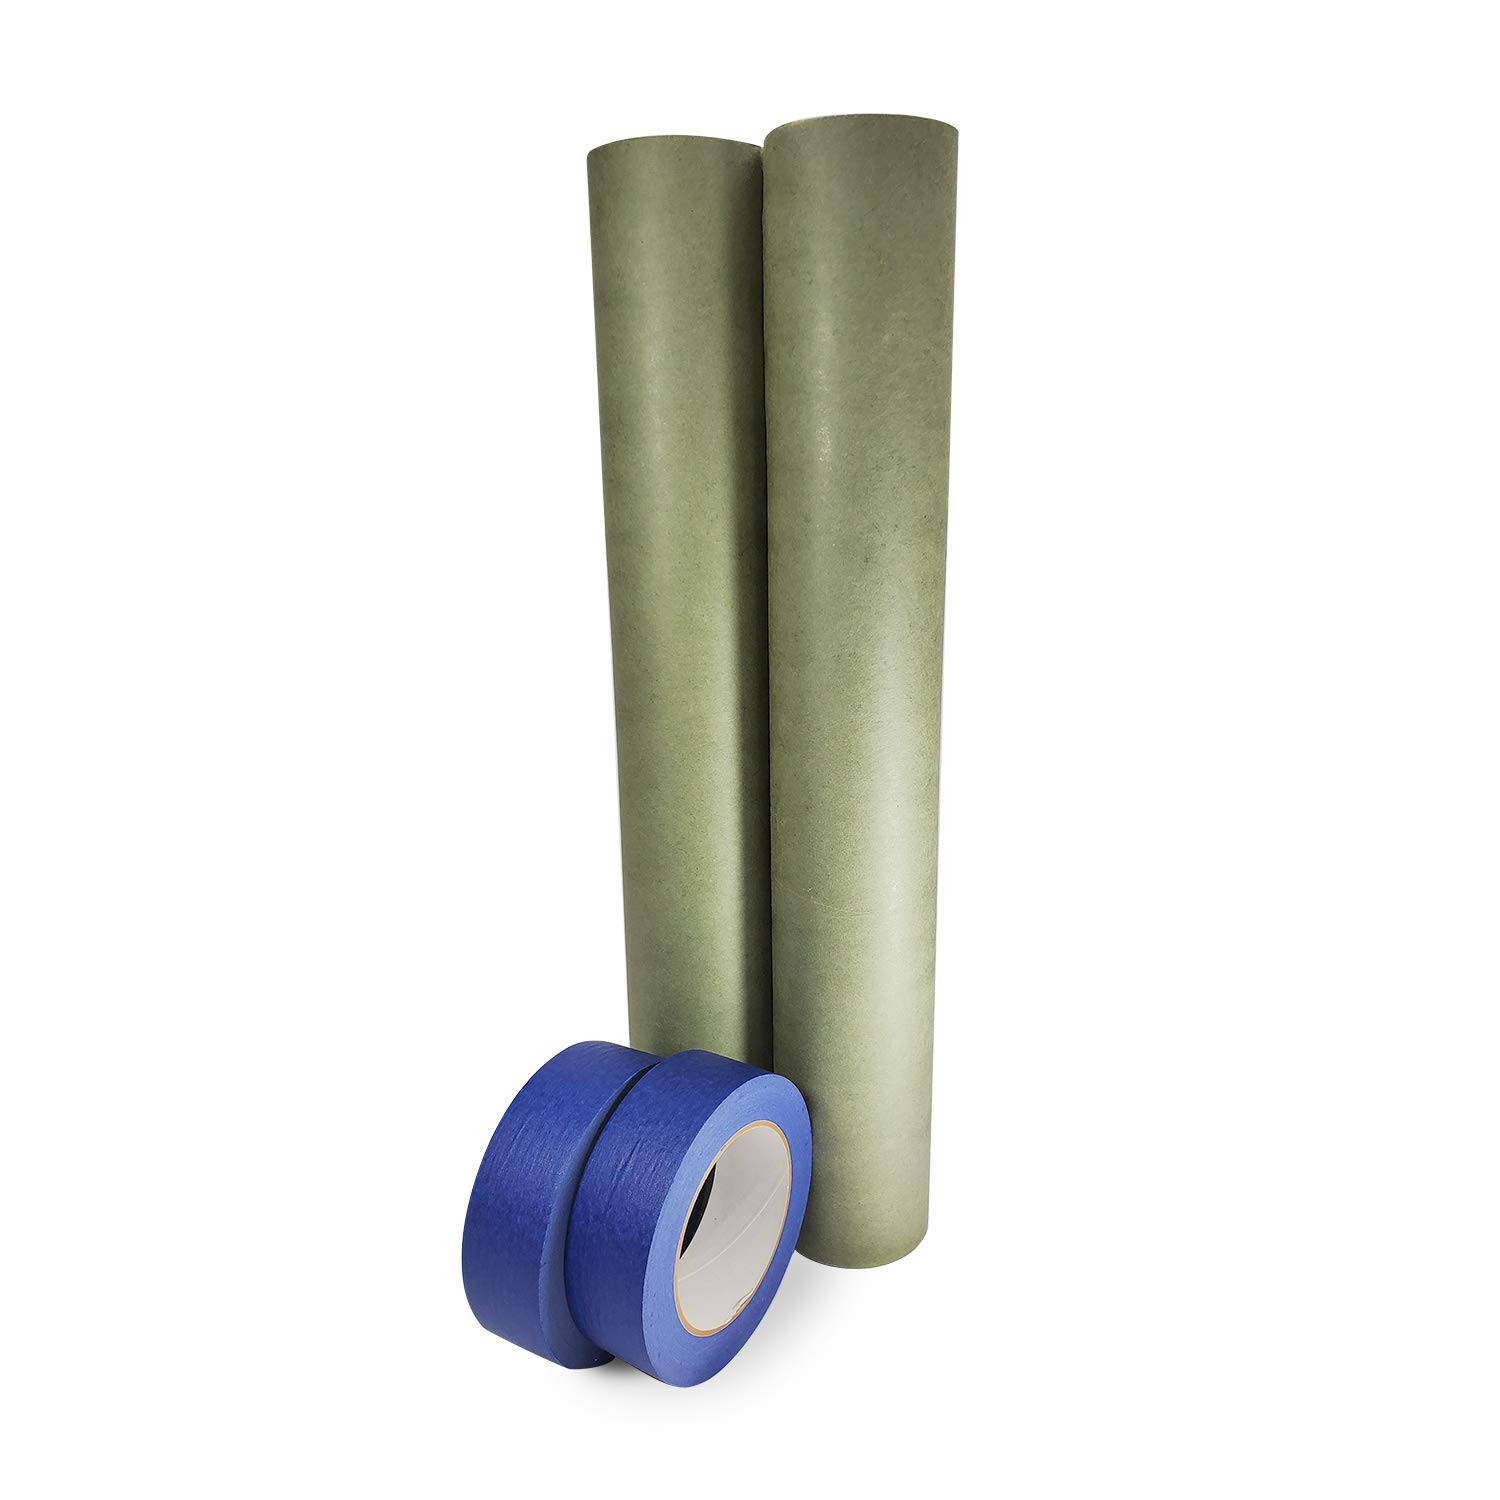 Masking Cover Set 1 1/2x60 yd Masking Painters Tape Roll with 12x60 yd  Masking Kraft Paper Roll and Masking Dispenser buy in stock in U.S. in IDL  Packaging